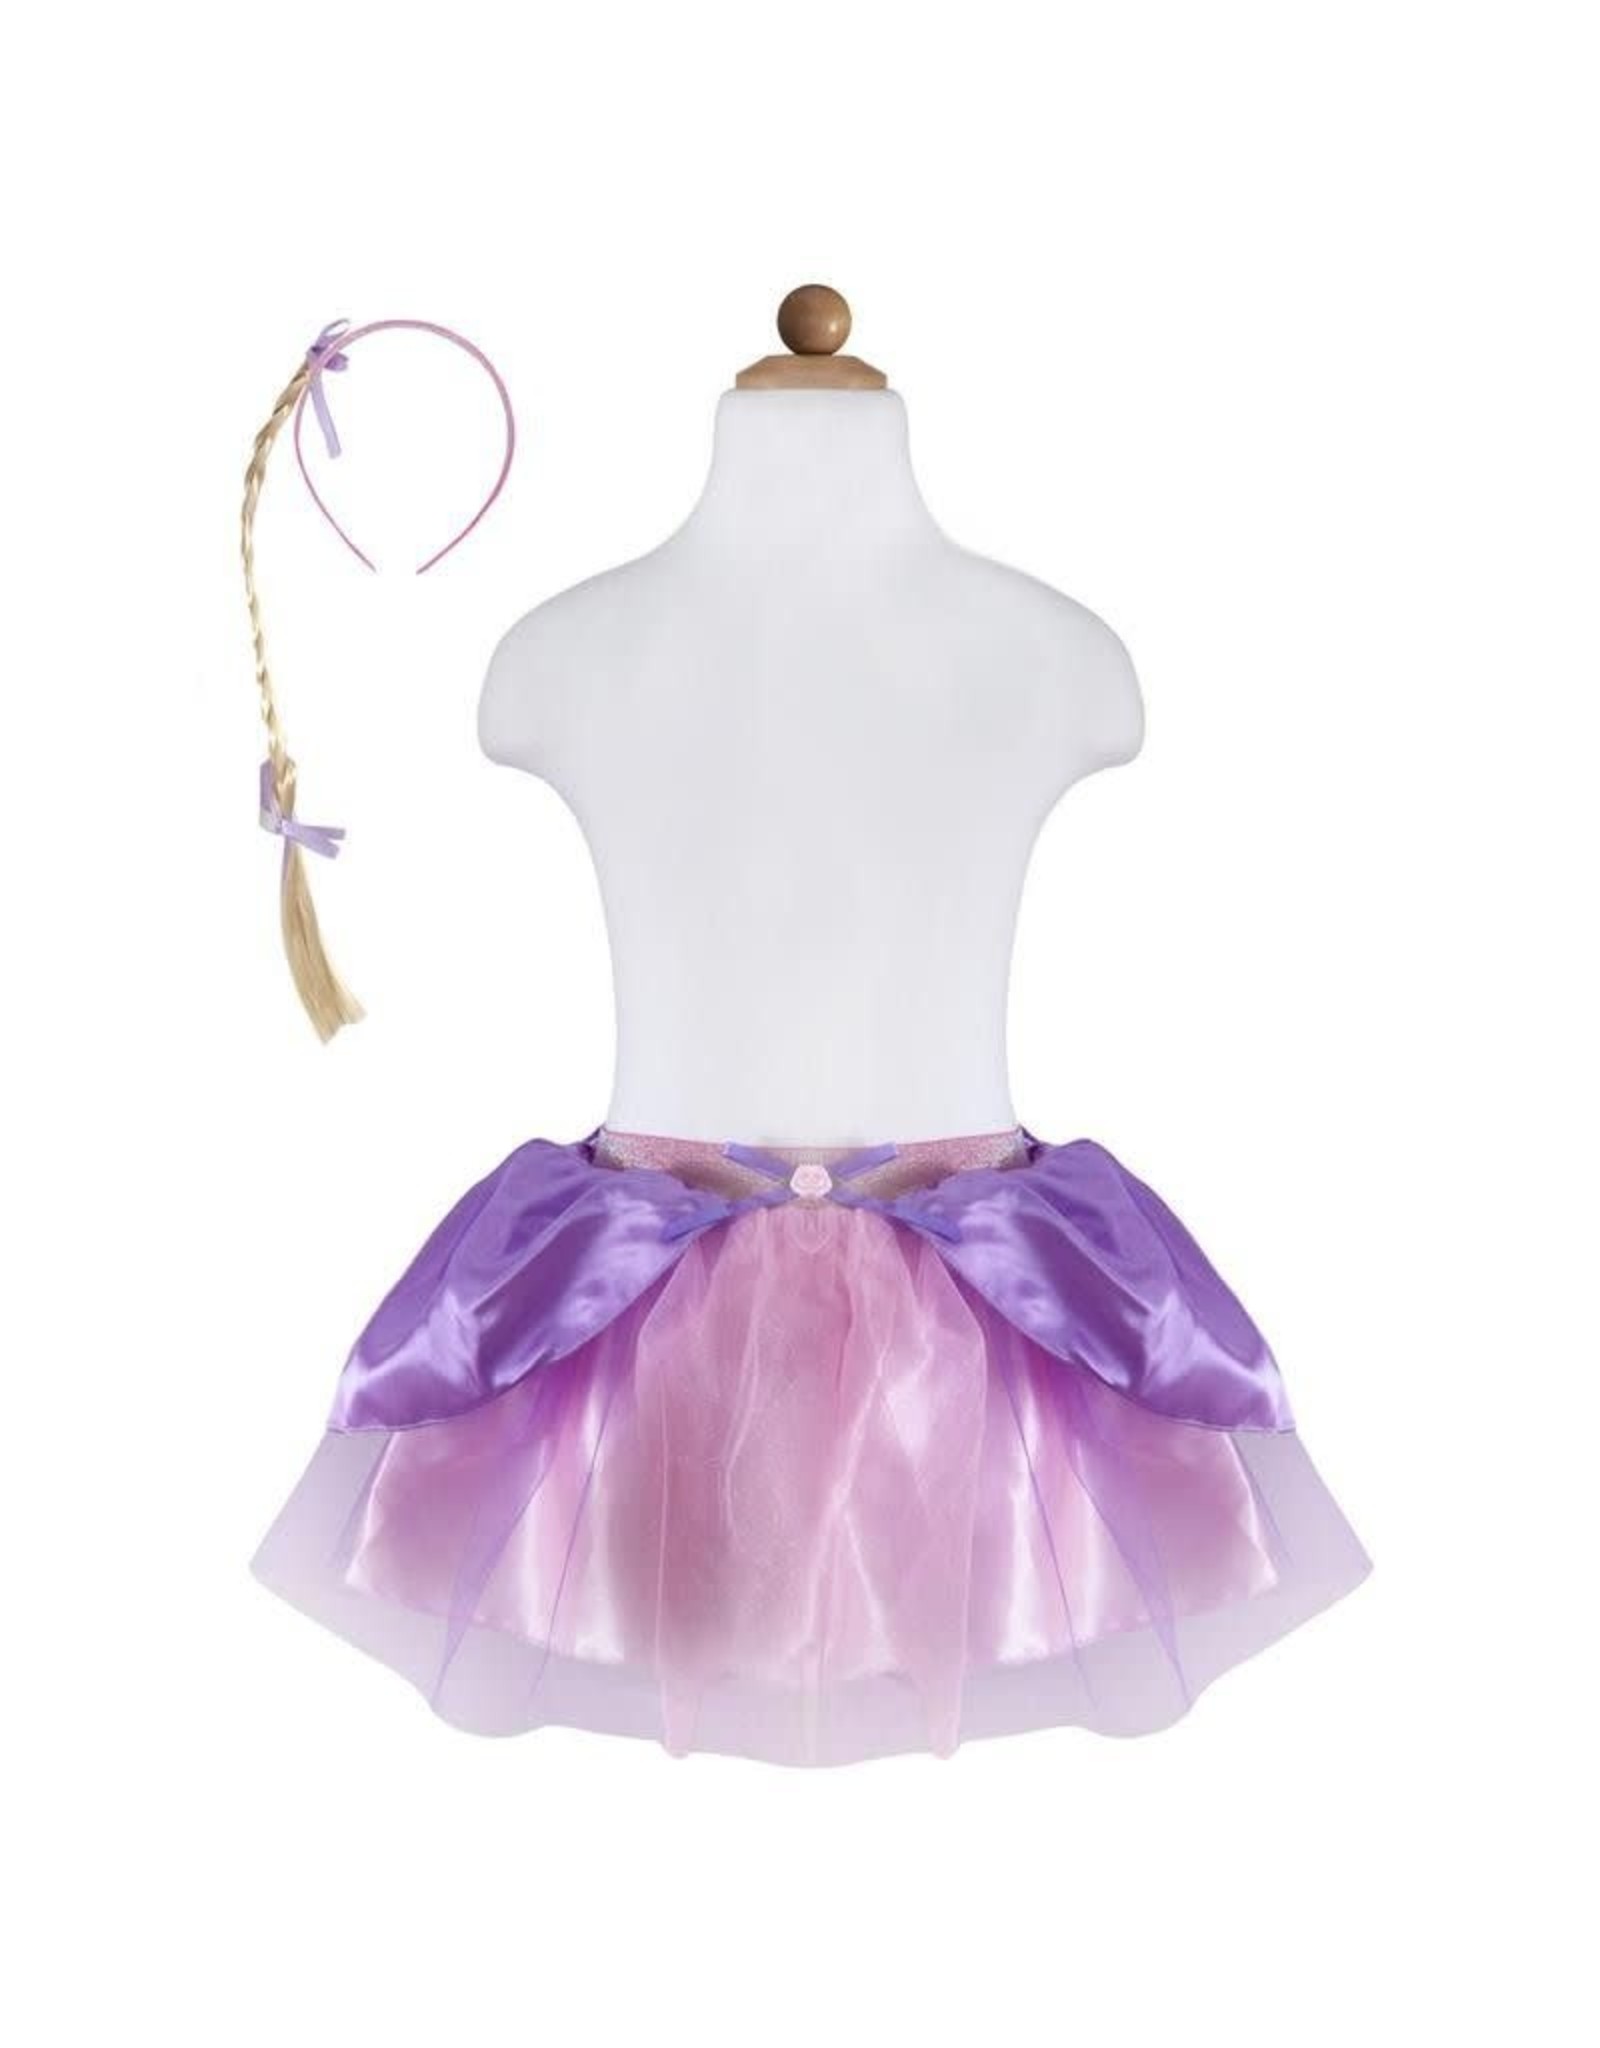 Great Pretenders Rapunzel Skirt With Braid, Size 4-6